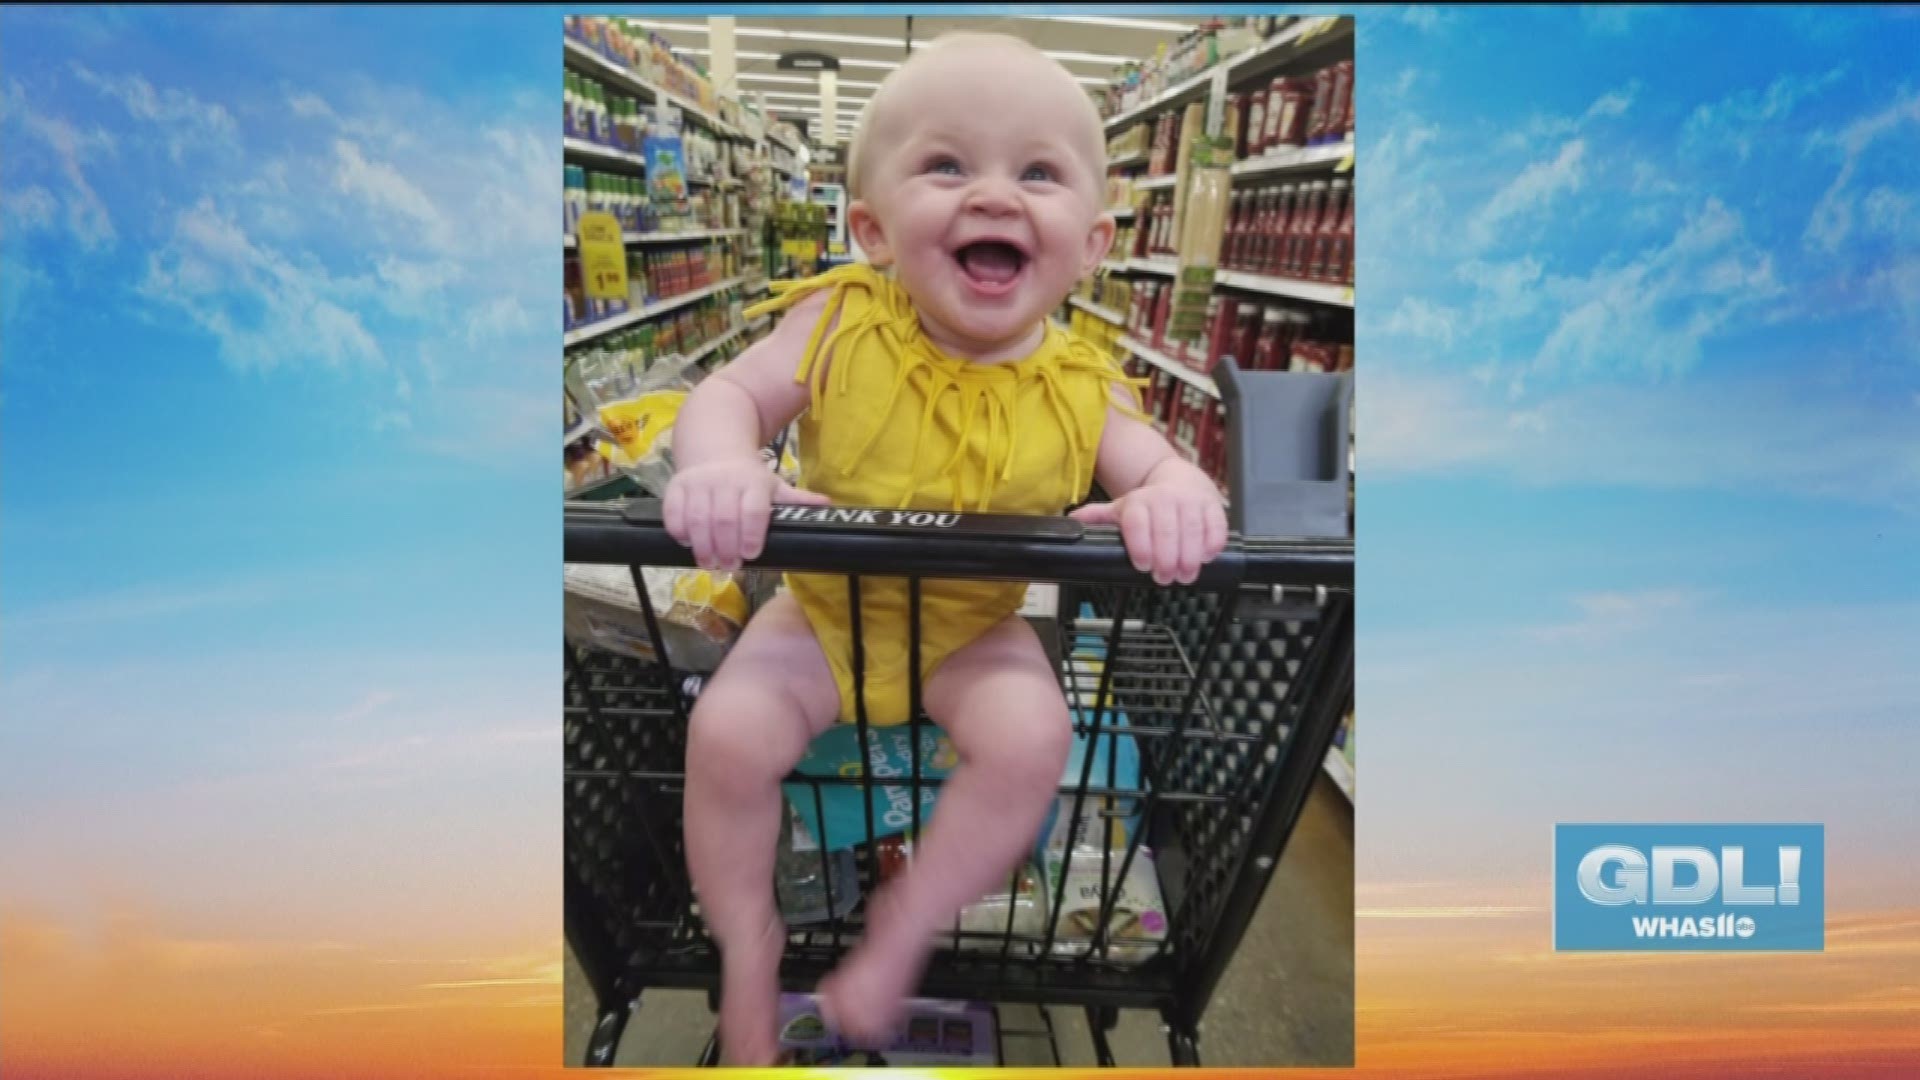 The WHAS11 cutest baby contest opens Monday, July 15th, 2019 and you can enter through July 28, 2019 on the WHAS11 Facebook page. The winner and their parents will be featured guests on Great Day Live.